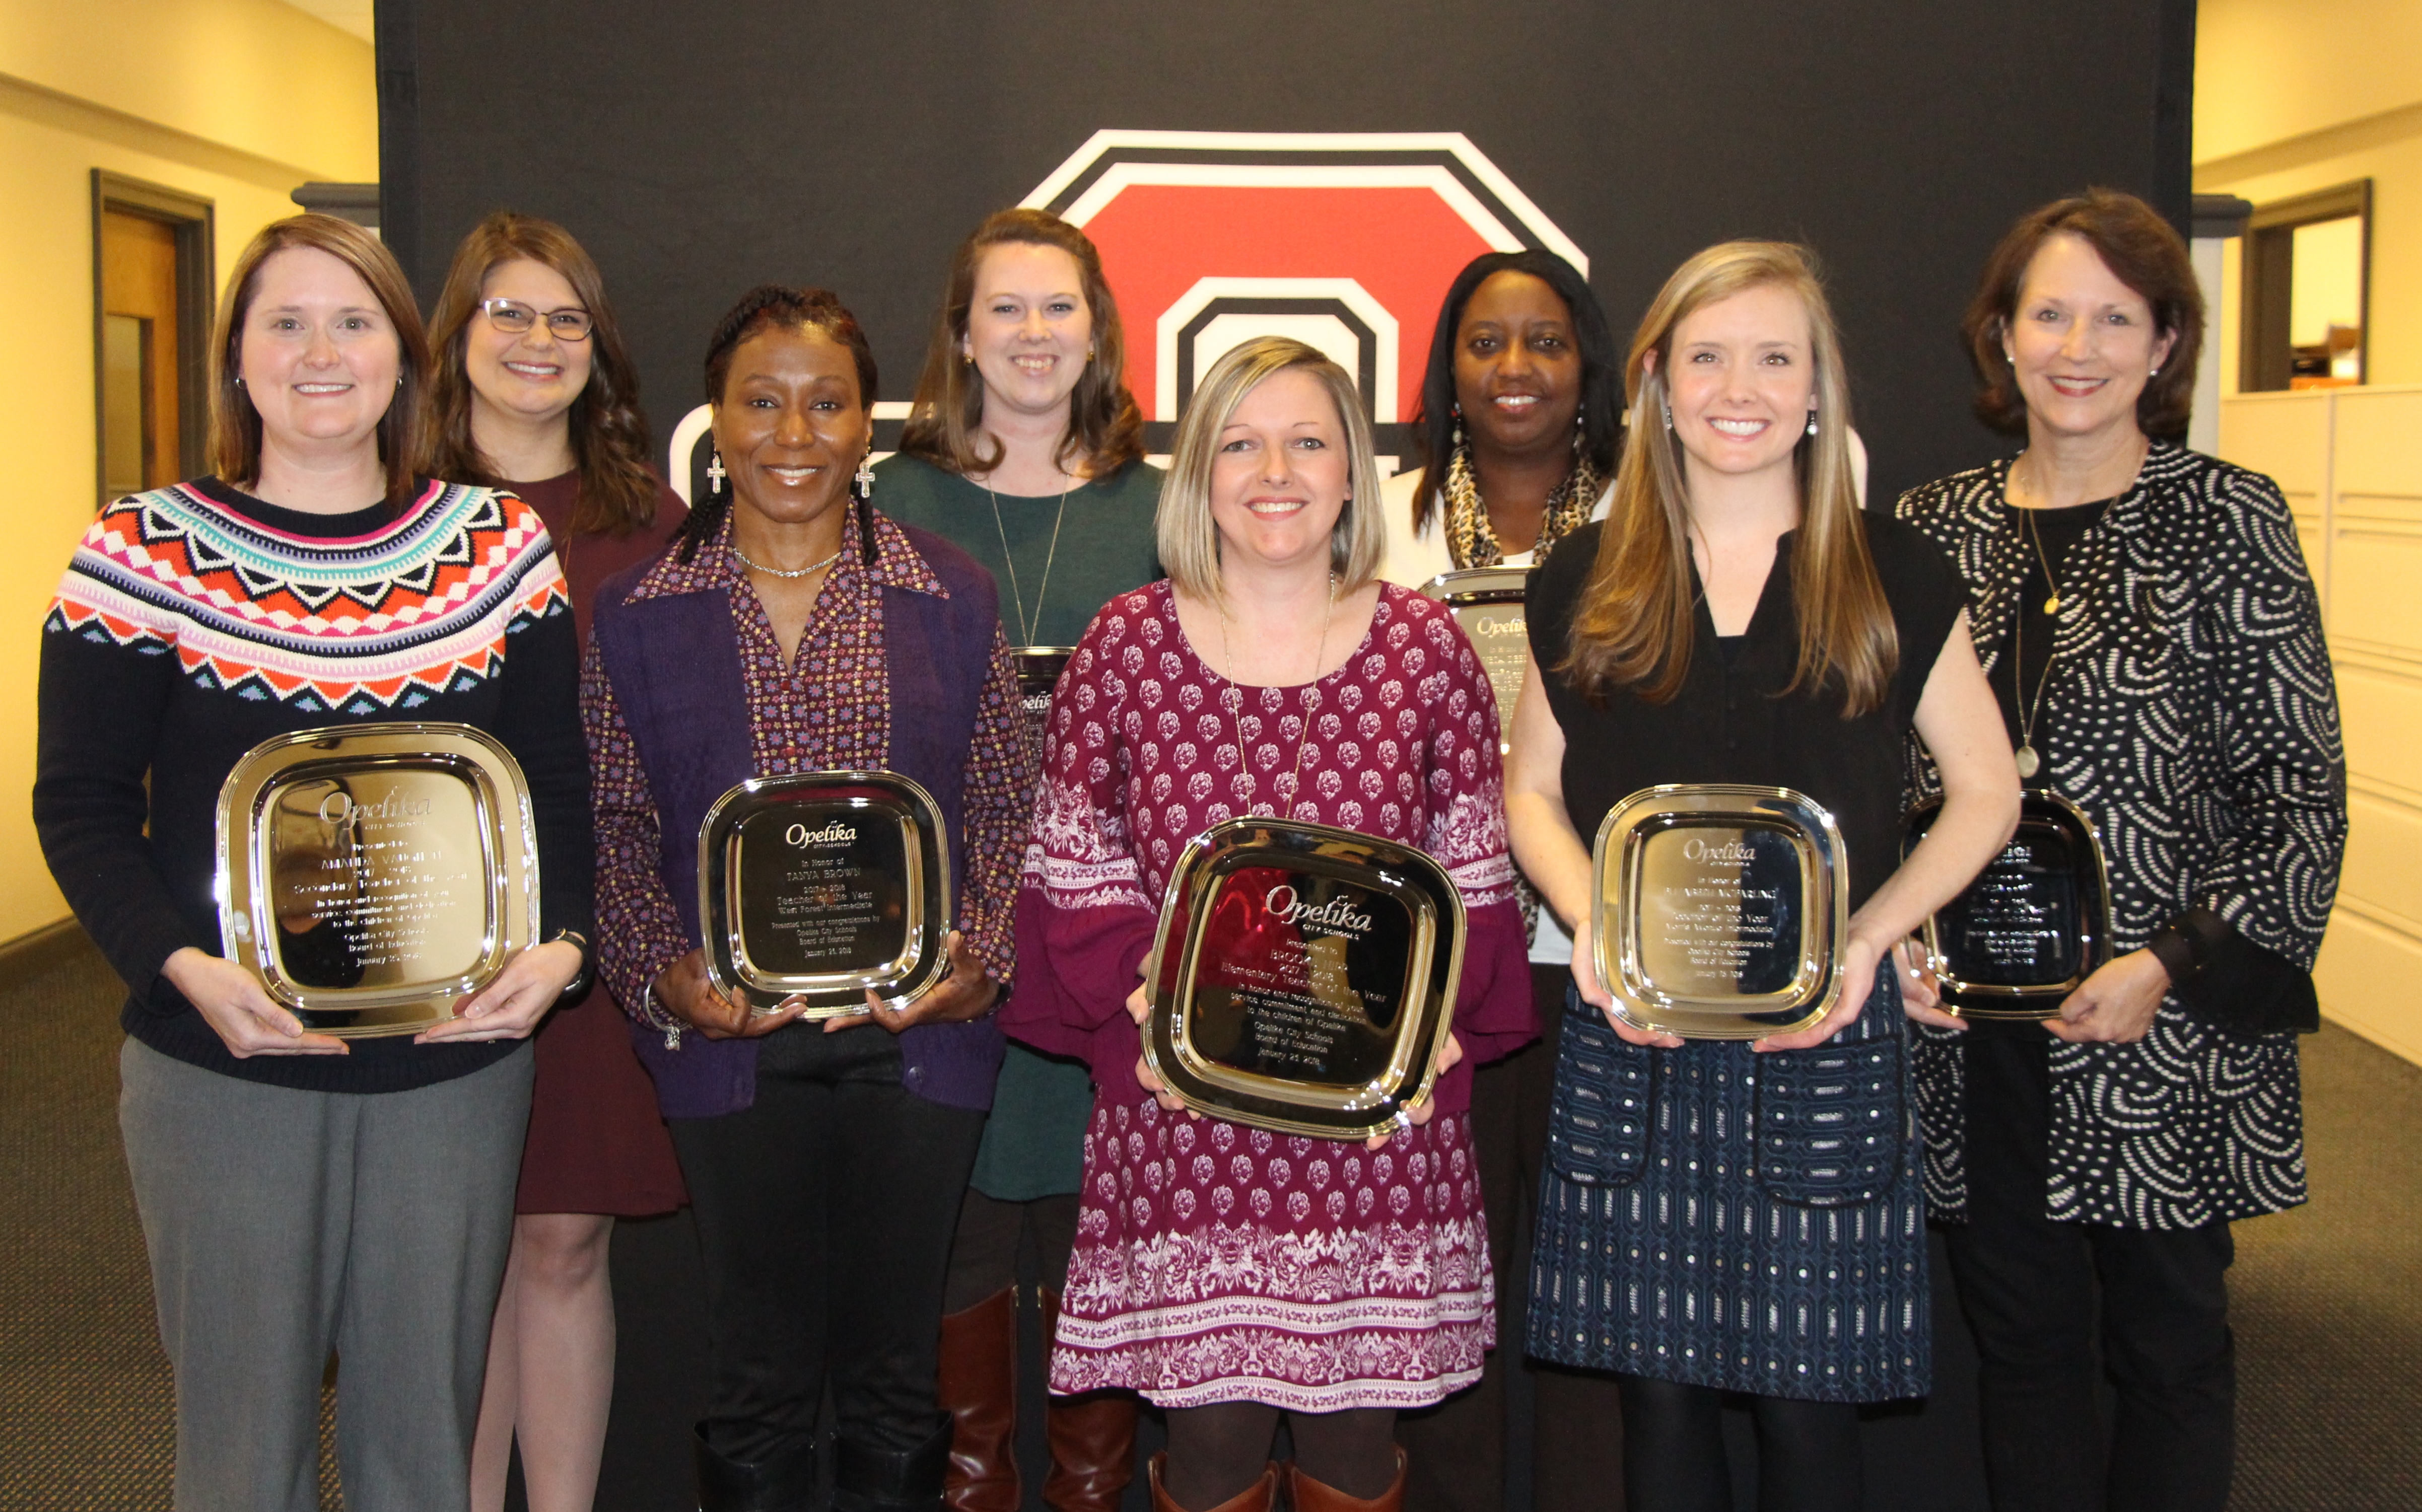 Opelika City Board of Education recognizes teachers of the year The